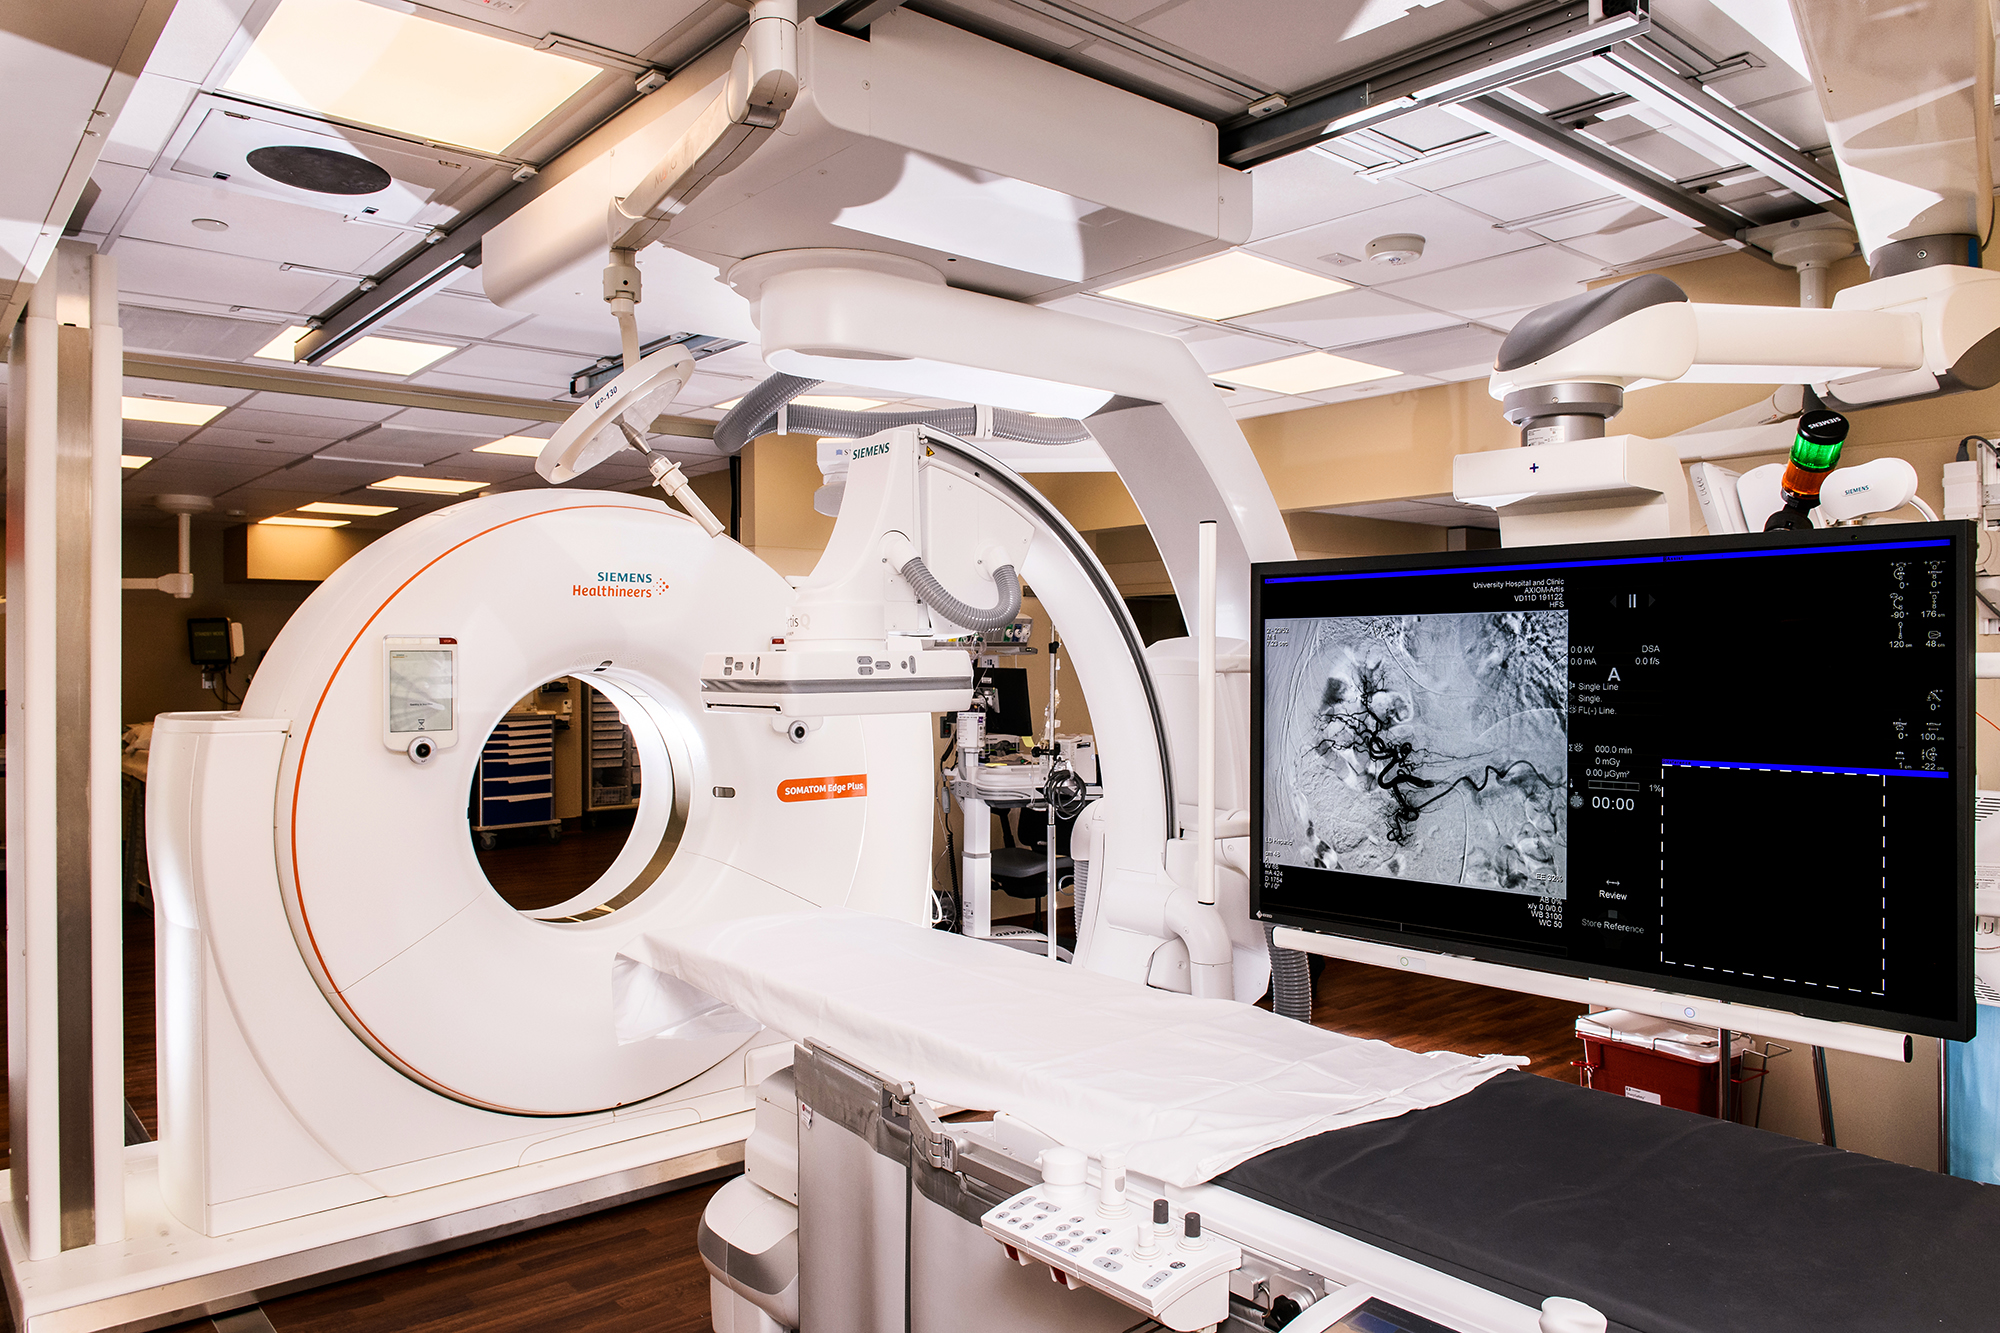 Interventional Radiology Suite at University Hospital.